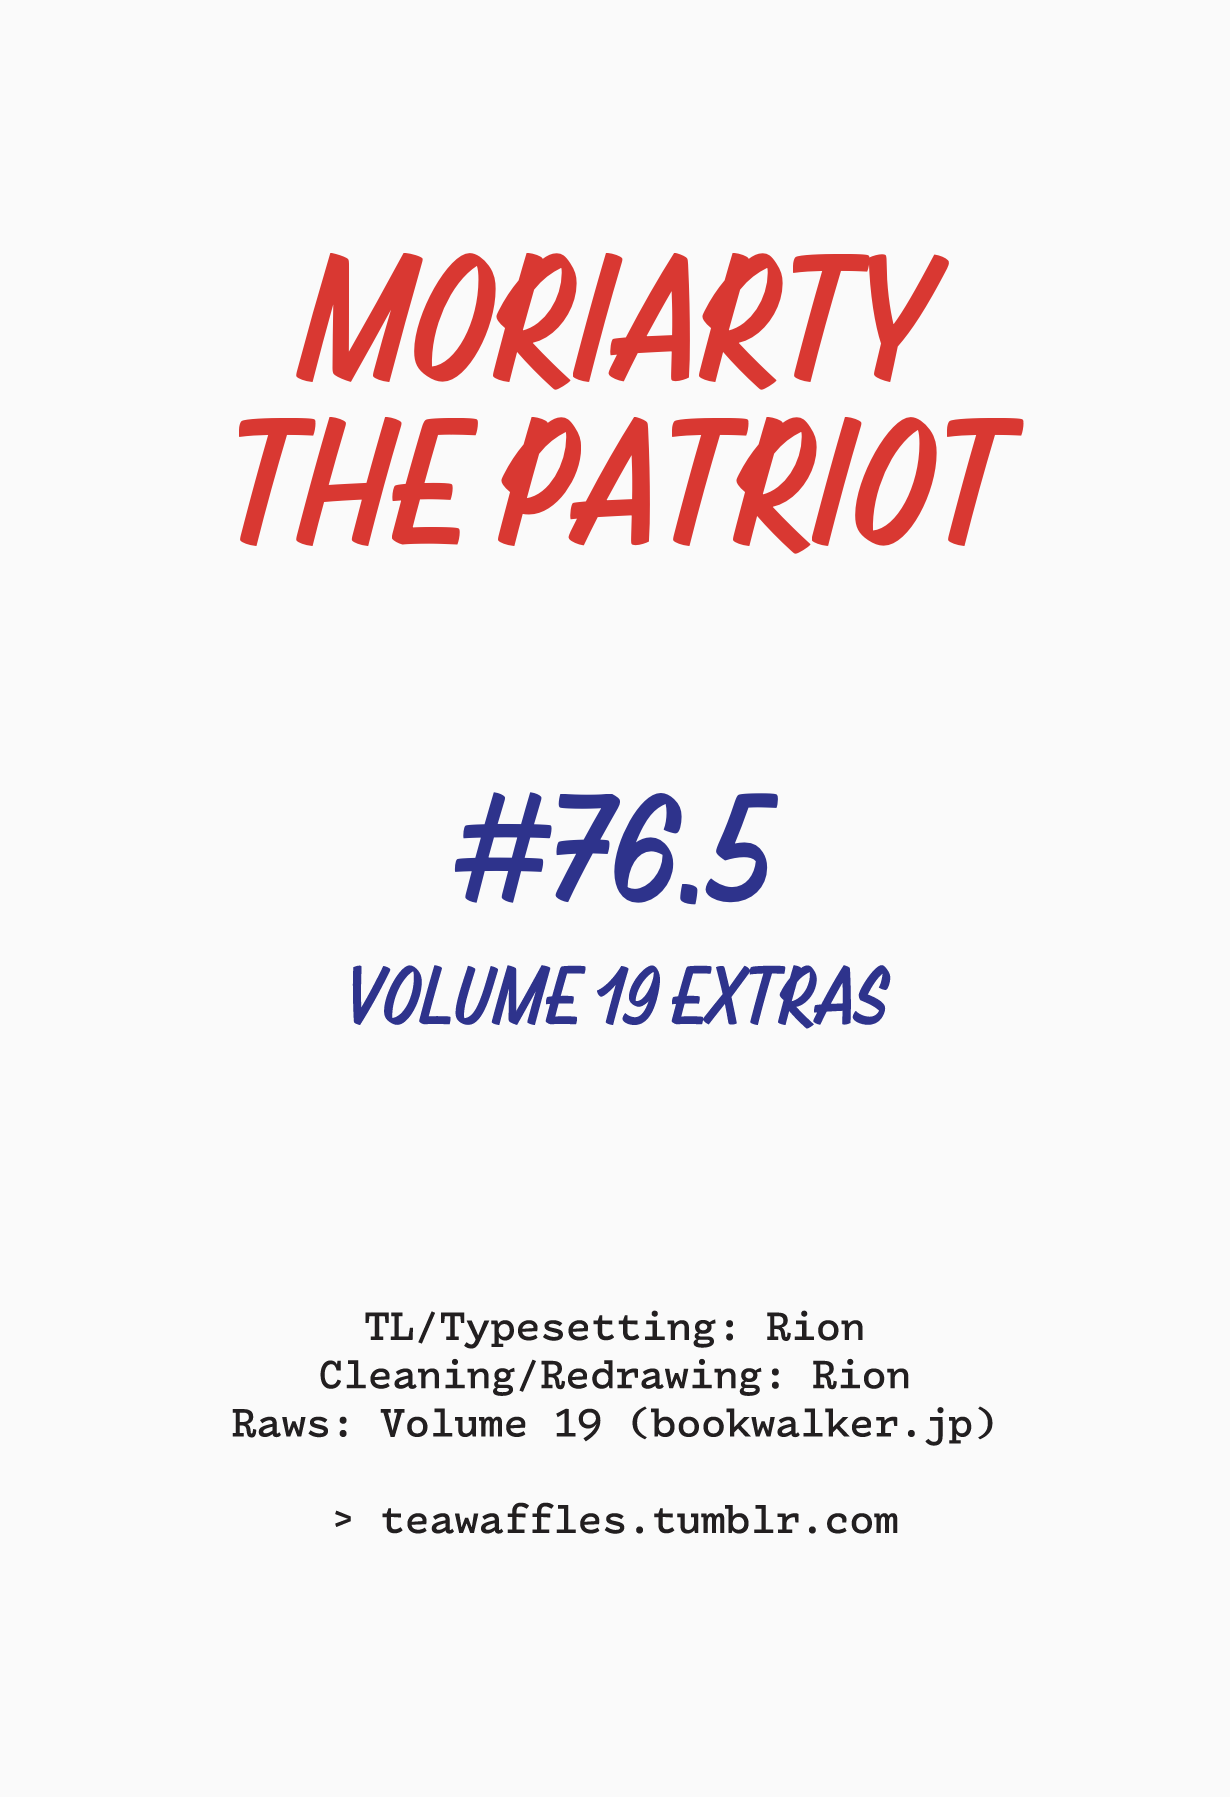 Yukoku No Moriarty Vol.19 Chapter 76.5: Volume 19 Extras - Picture 1